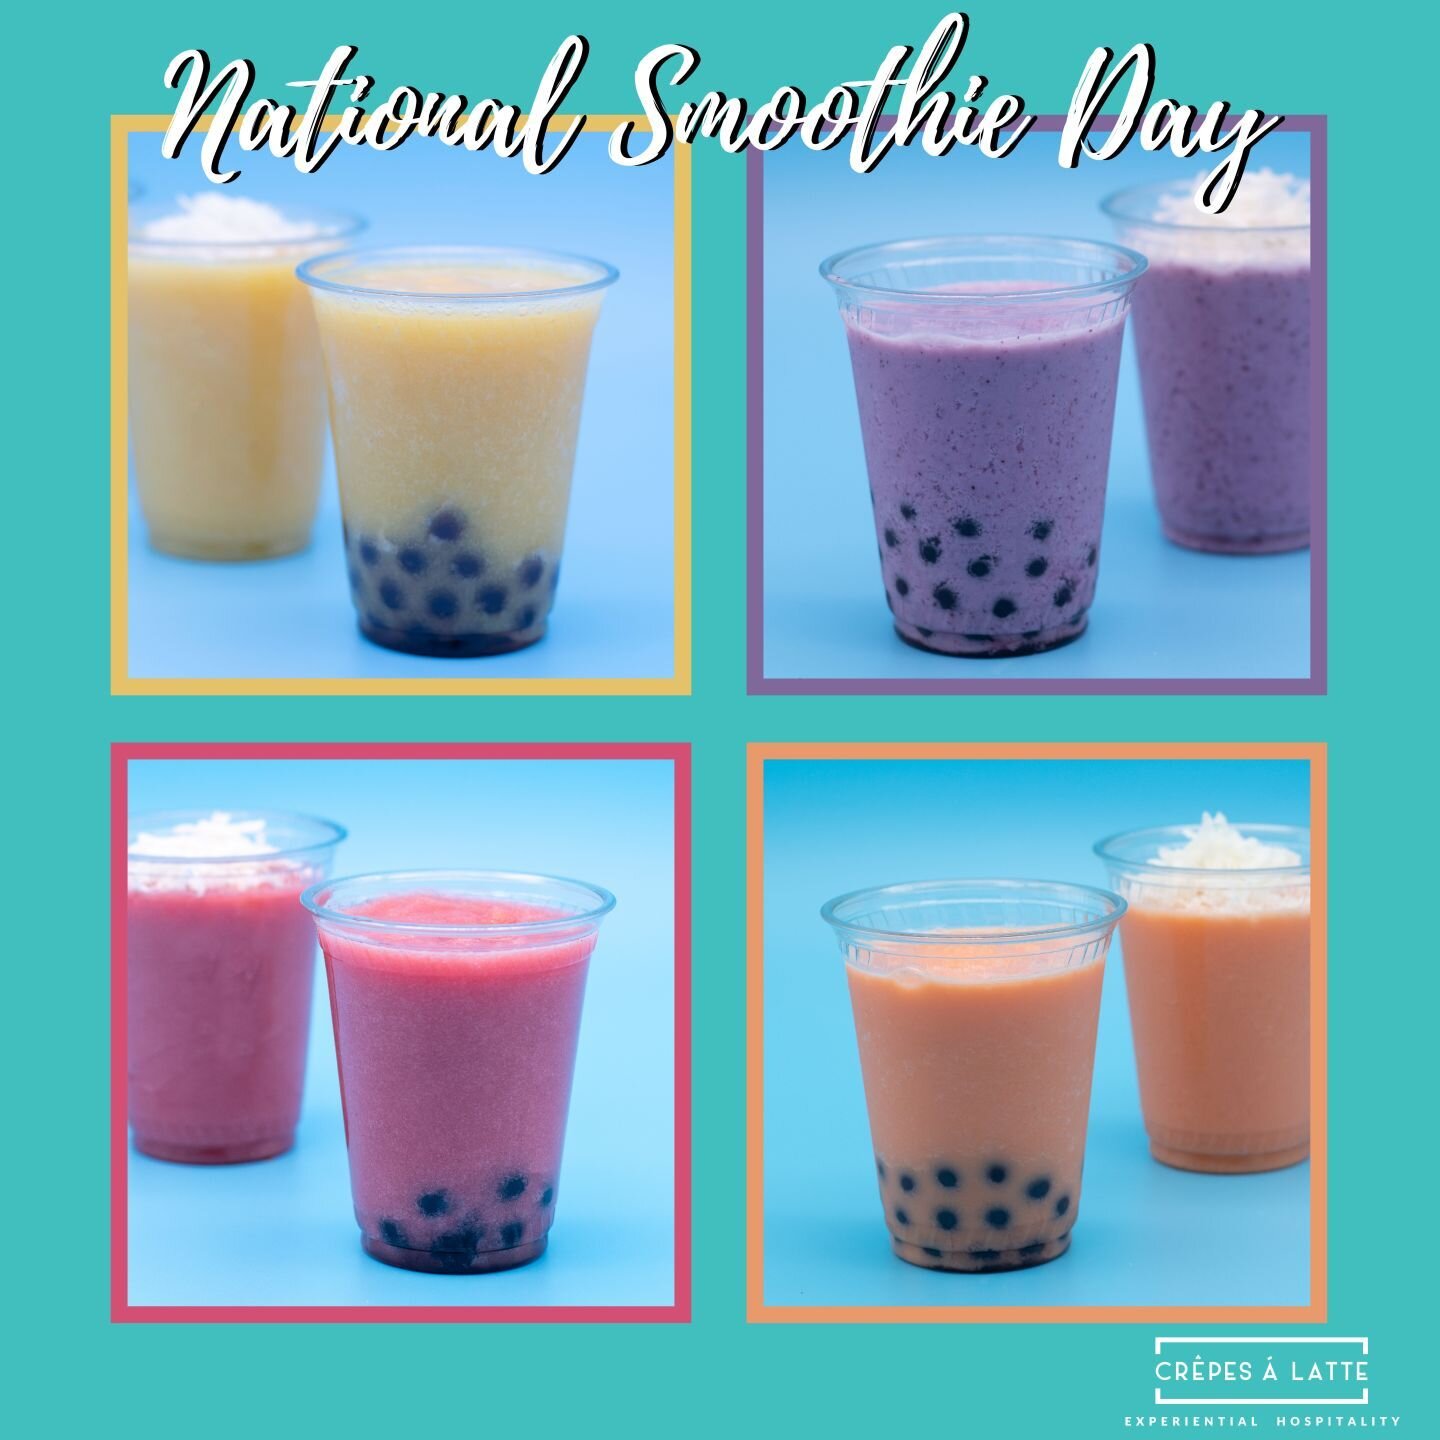 Happy #NationalSmoothieDay 
Be the coolest booth at your next #tradeshow this season with one of our 30+ frozen beverage options.
Contact us to find out how. #Smoothies #FrozenCoffee #Shakes #liveevents